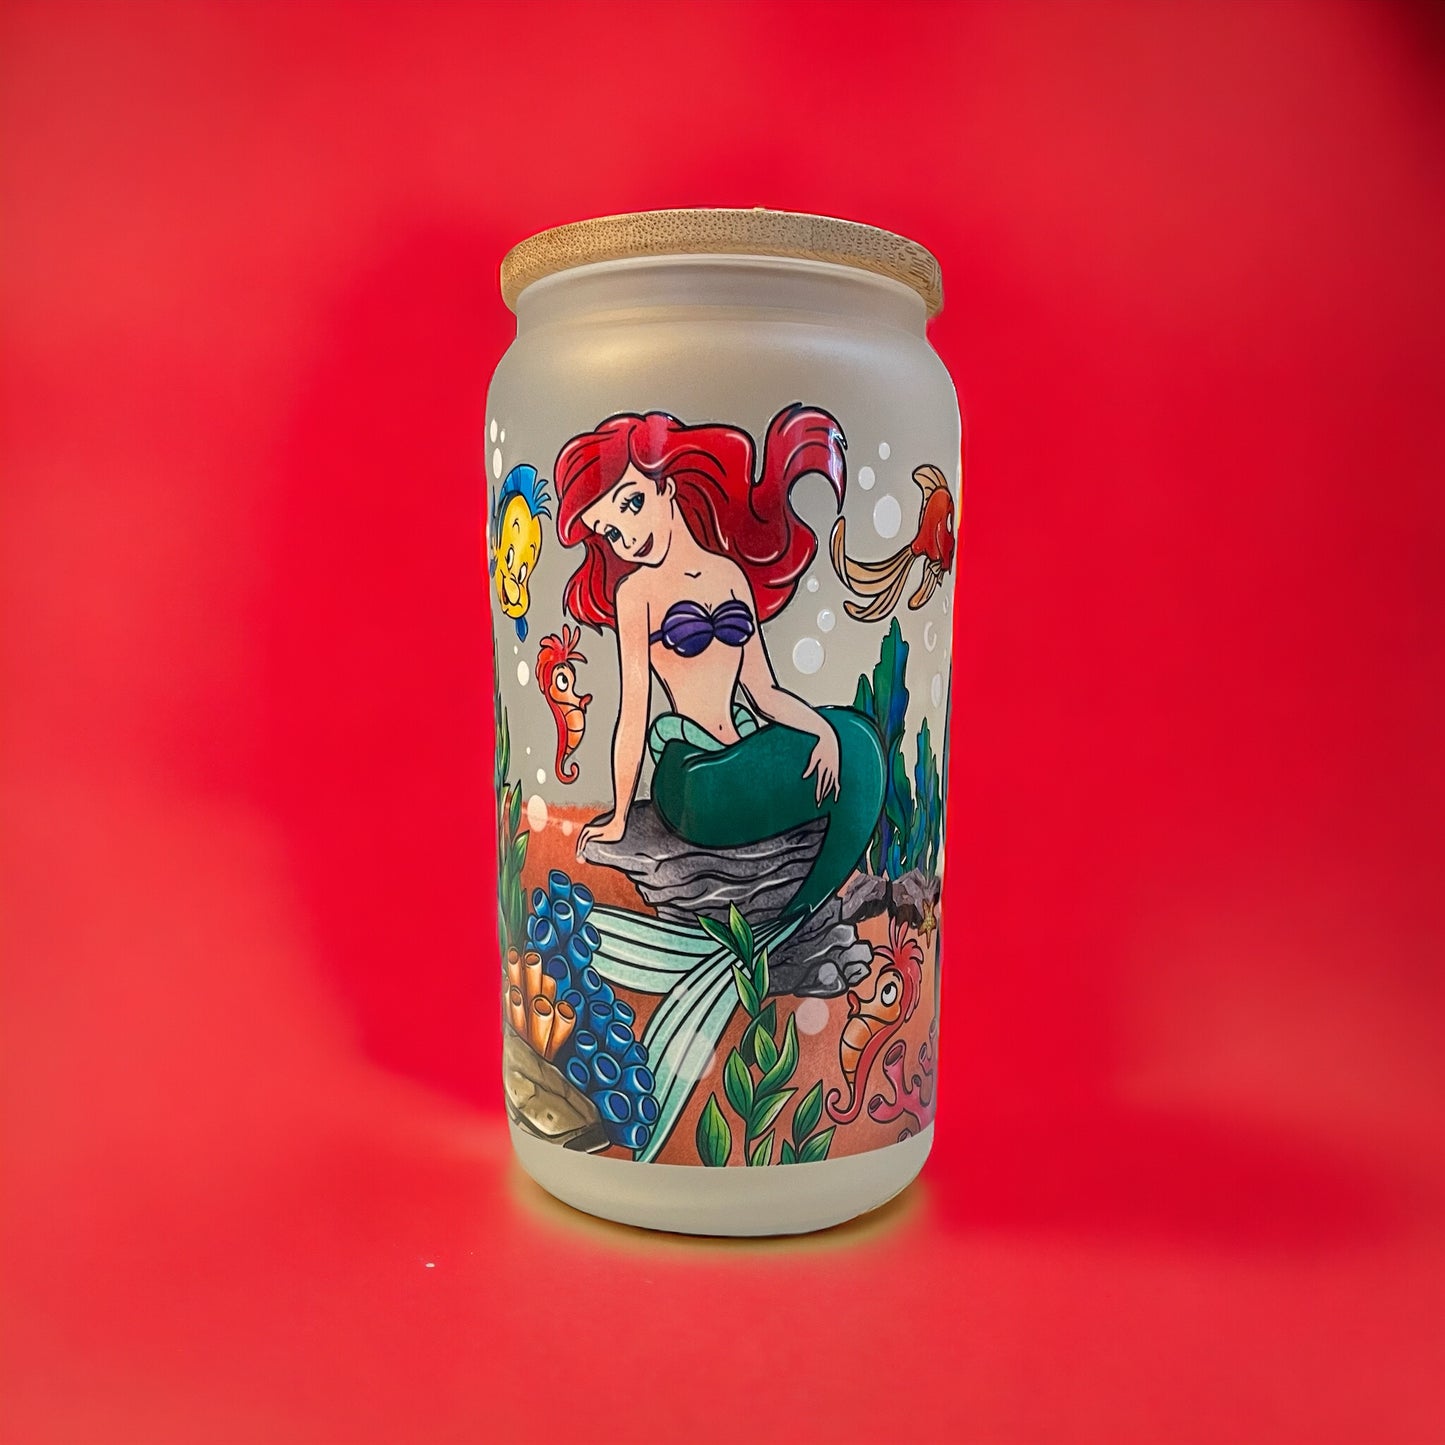 Mermaid 16oz. Frosted Glass Can with Straw, Glass Can, Beer Can, Mermaid Cup, Cups with Straws, Glass Cup with Straw and Bamboo Lid